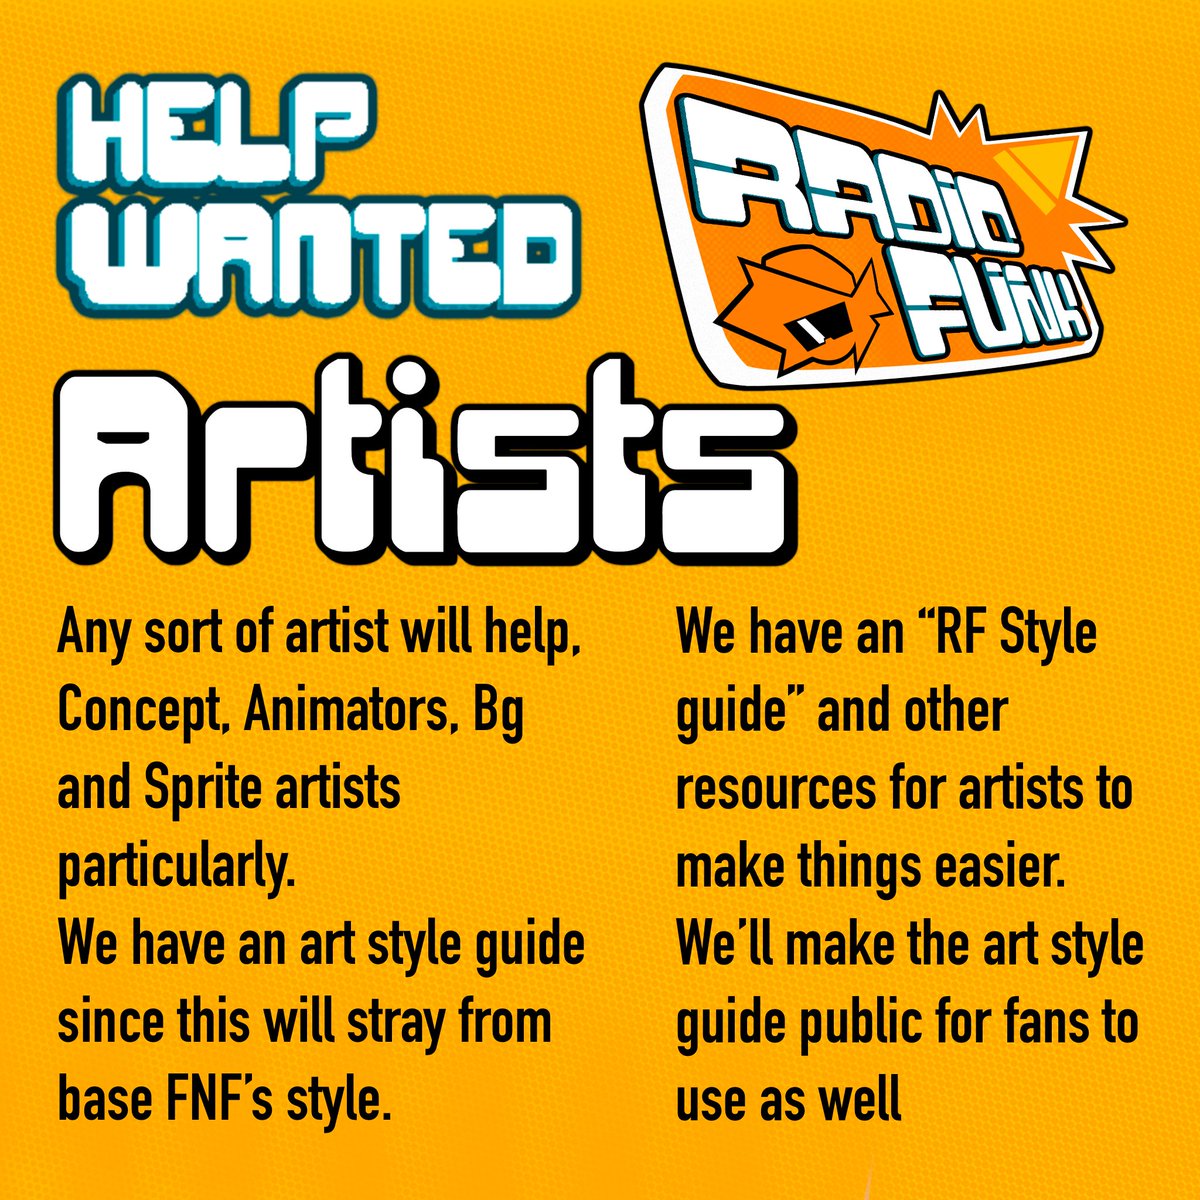 We’re looking for art help! Any sort of FNF artist who can mimic other art styles would be helpful! Dm this account with examples! Art style guide will be public soon!
#FNF #fnfmod #fnfmods #RadioFunk #FNFRadioFunk